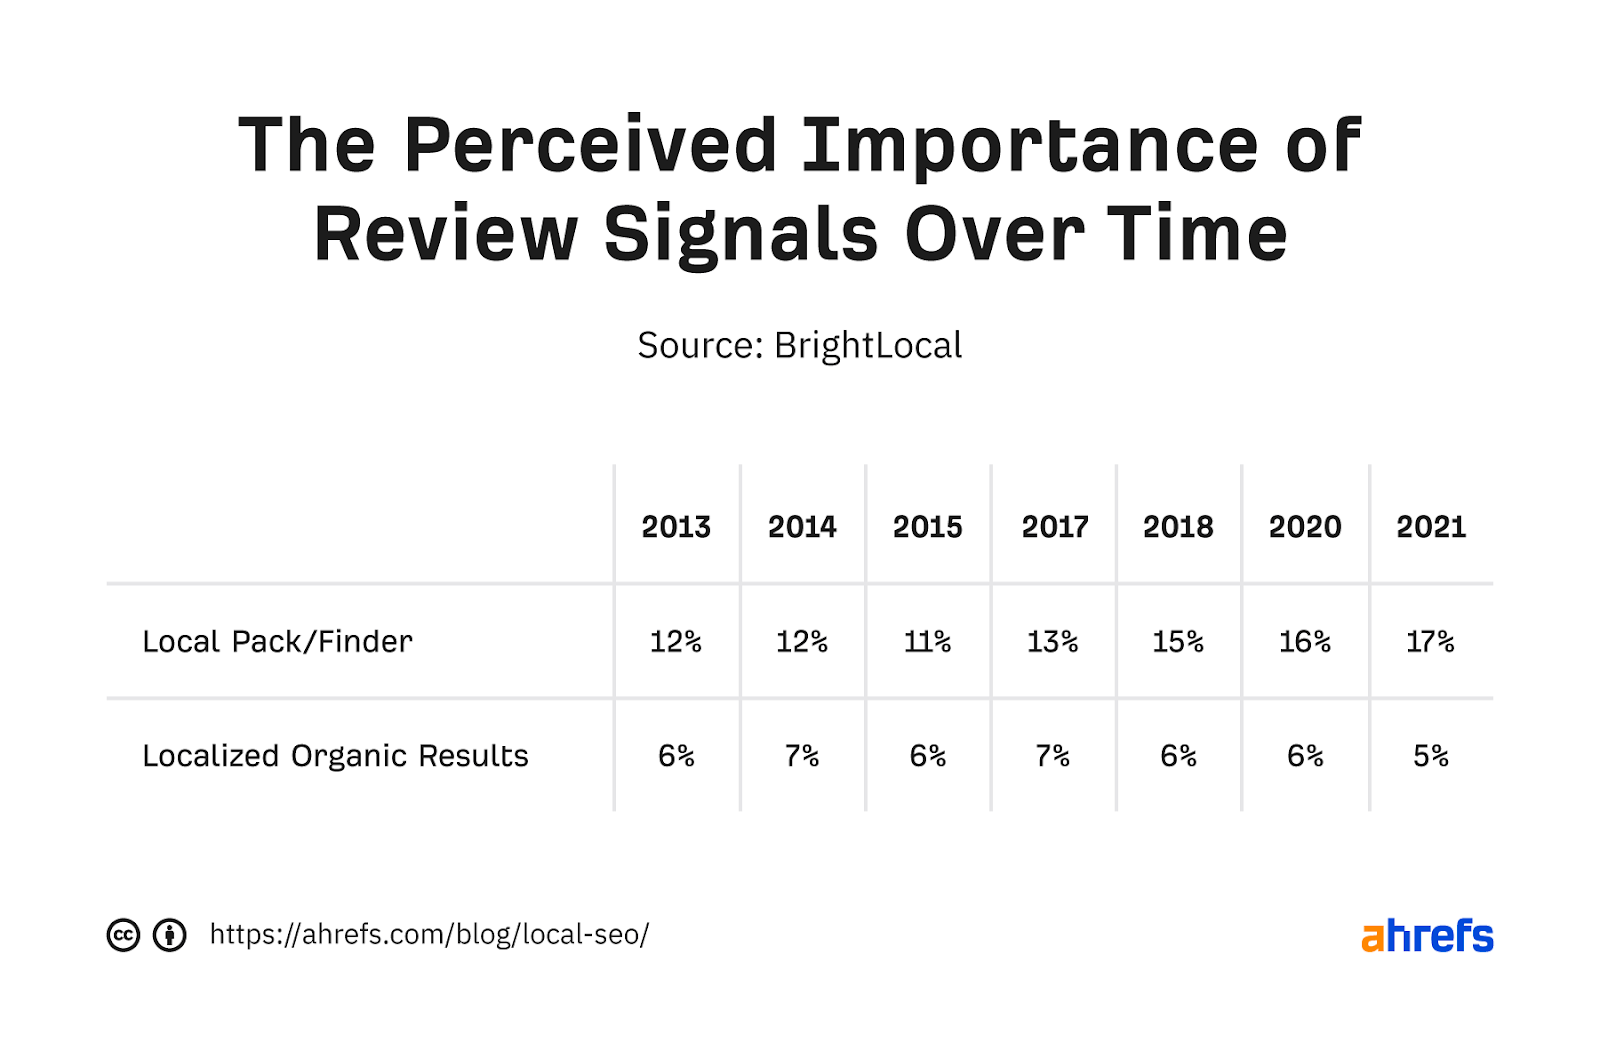 The perceived importance of reviews as a ranking factor over time